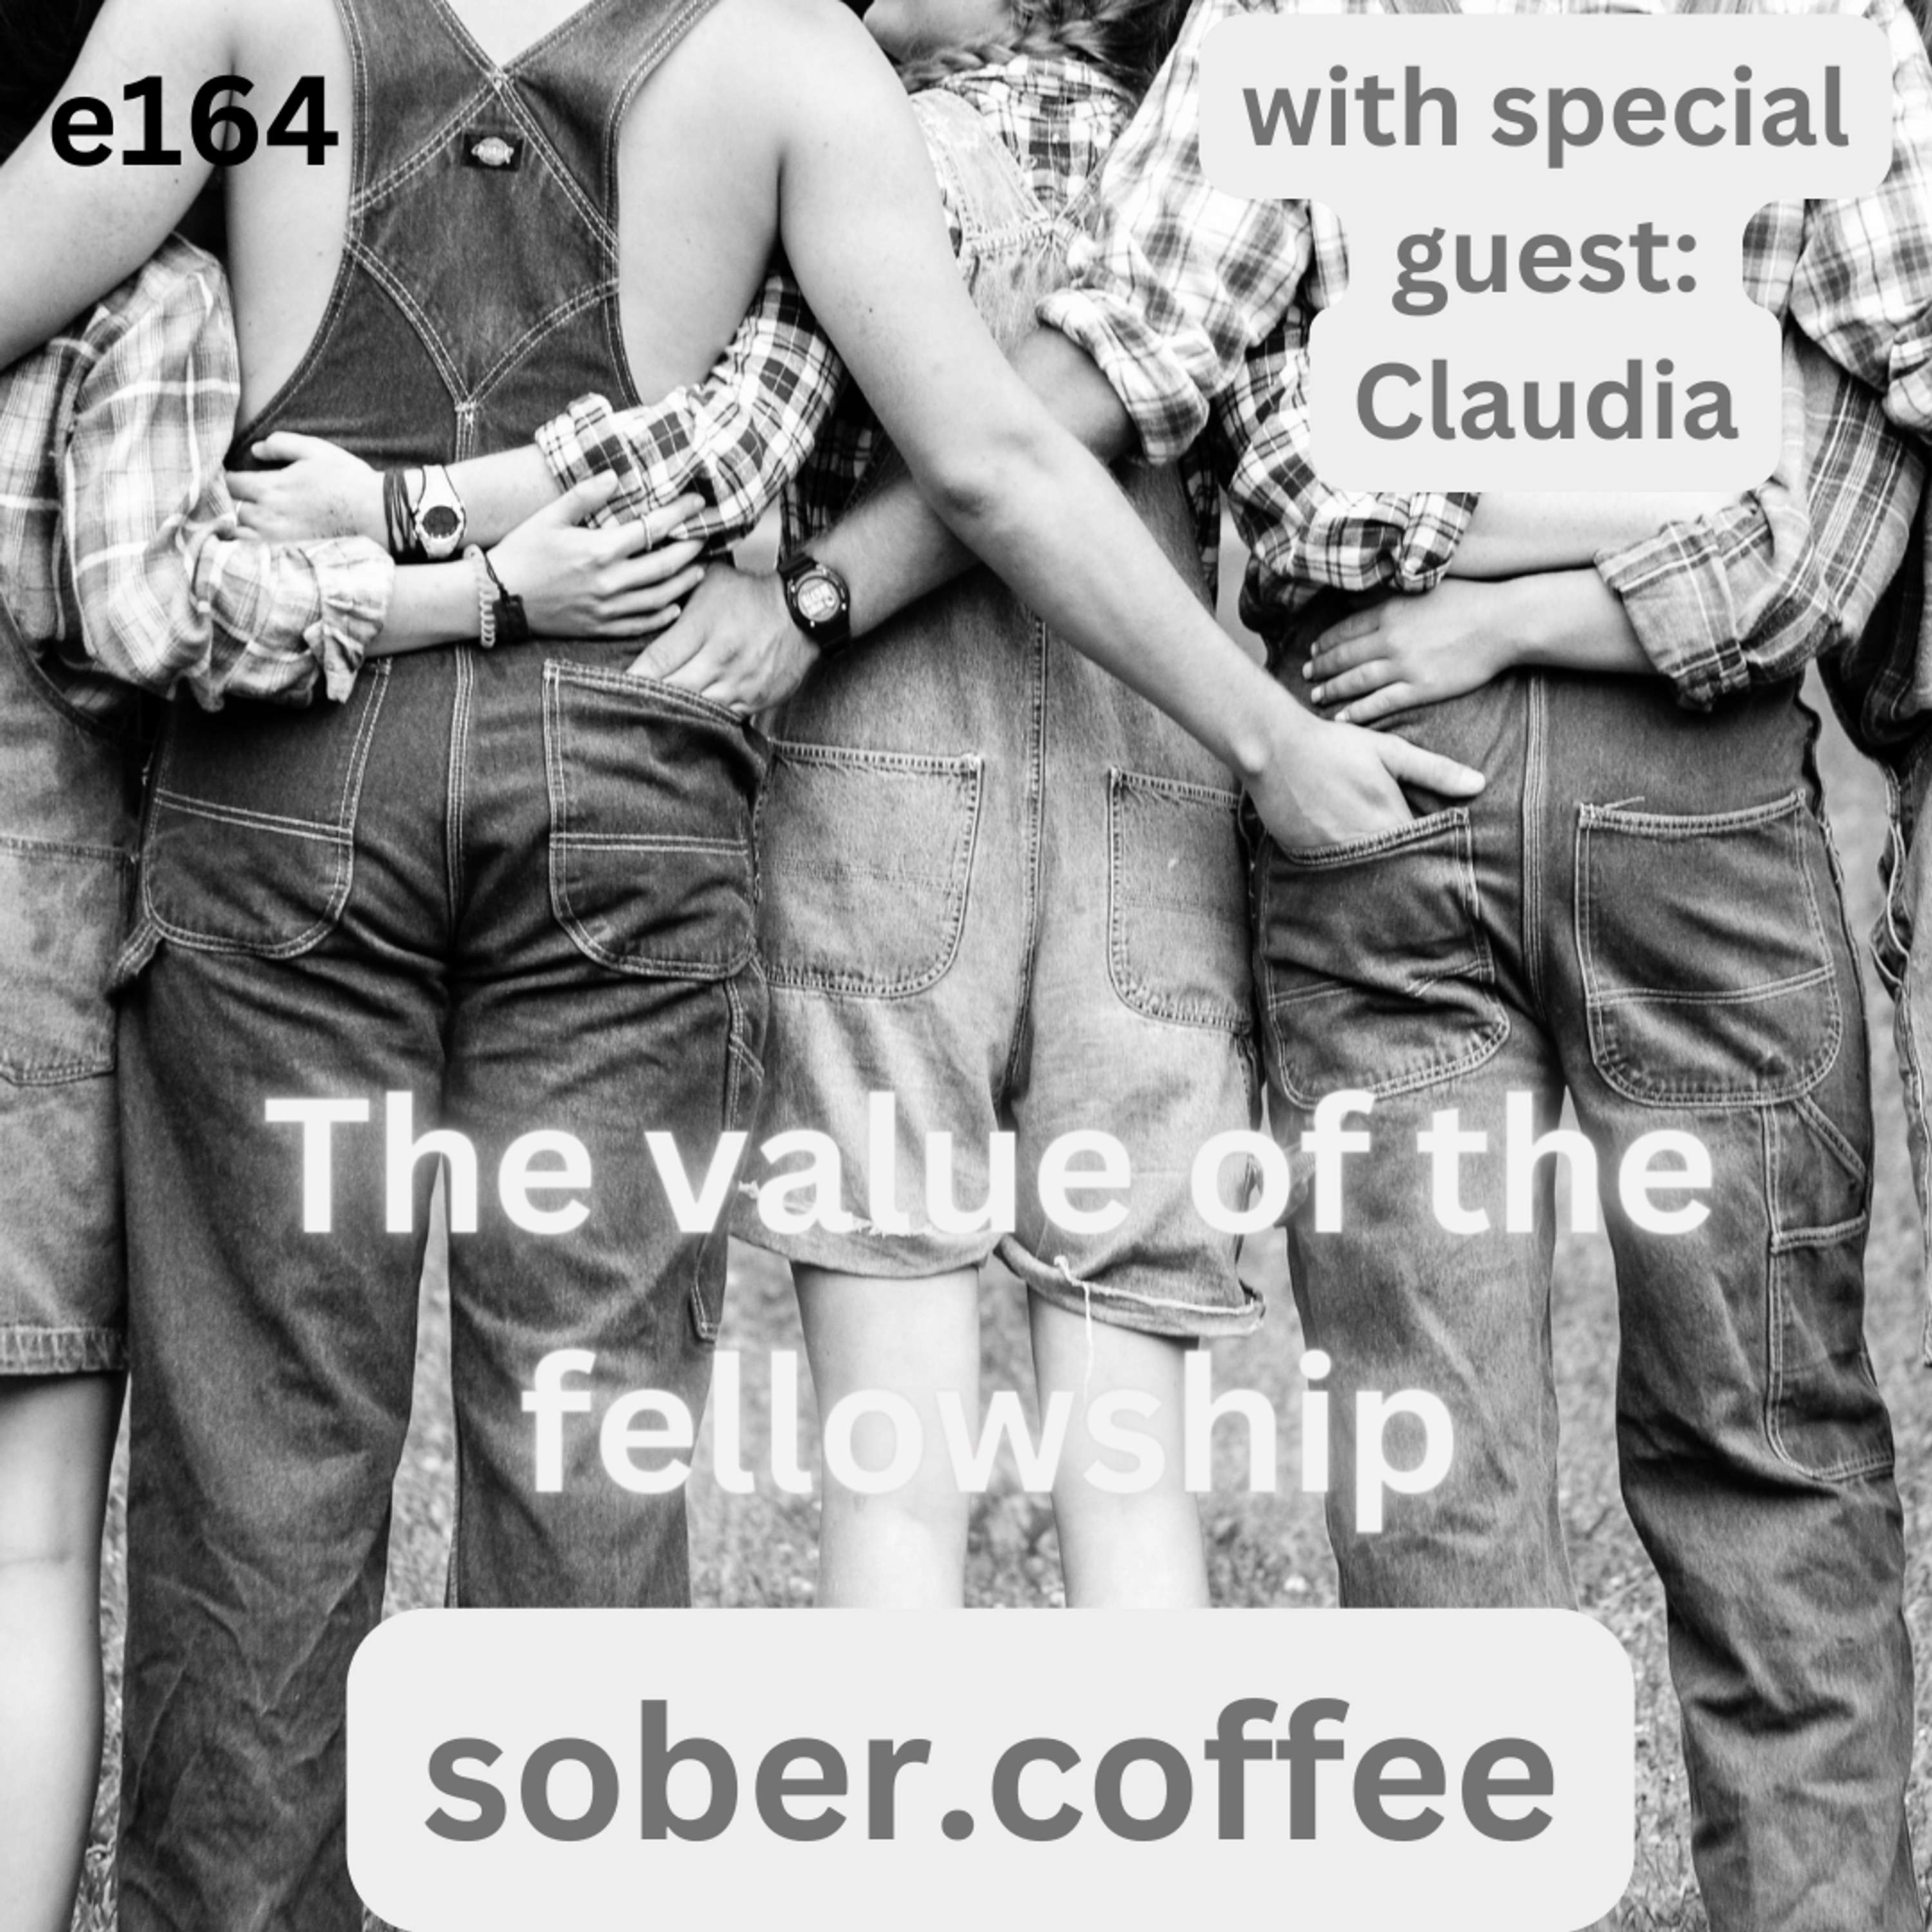 The value of the fellowship: Coffee with Claudia